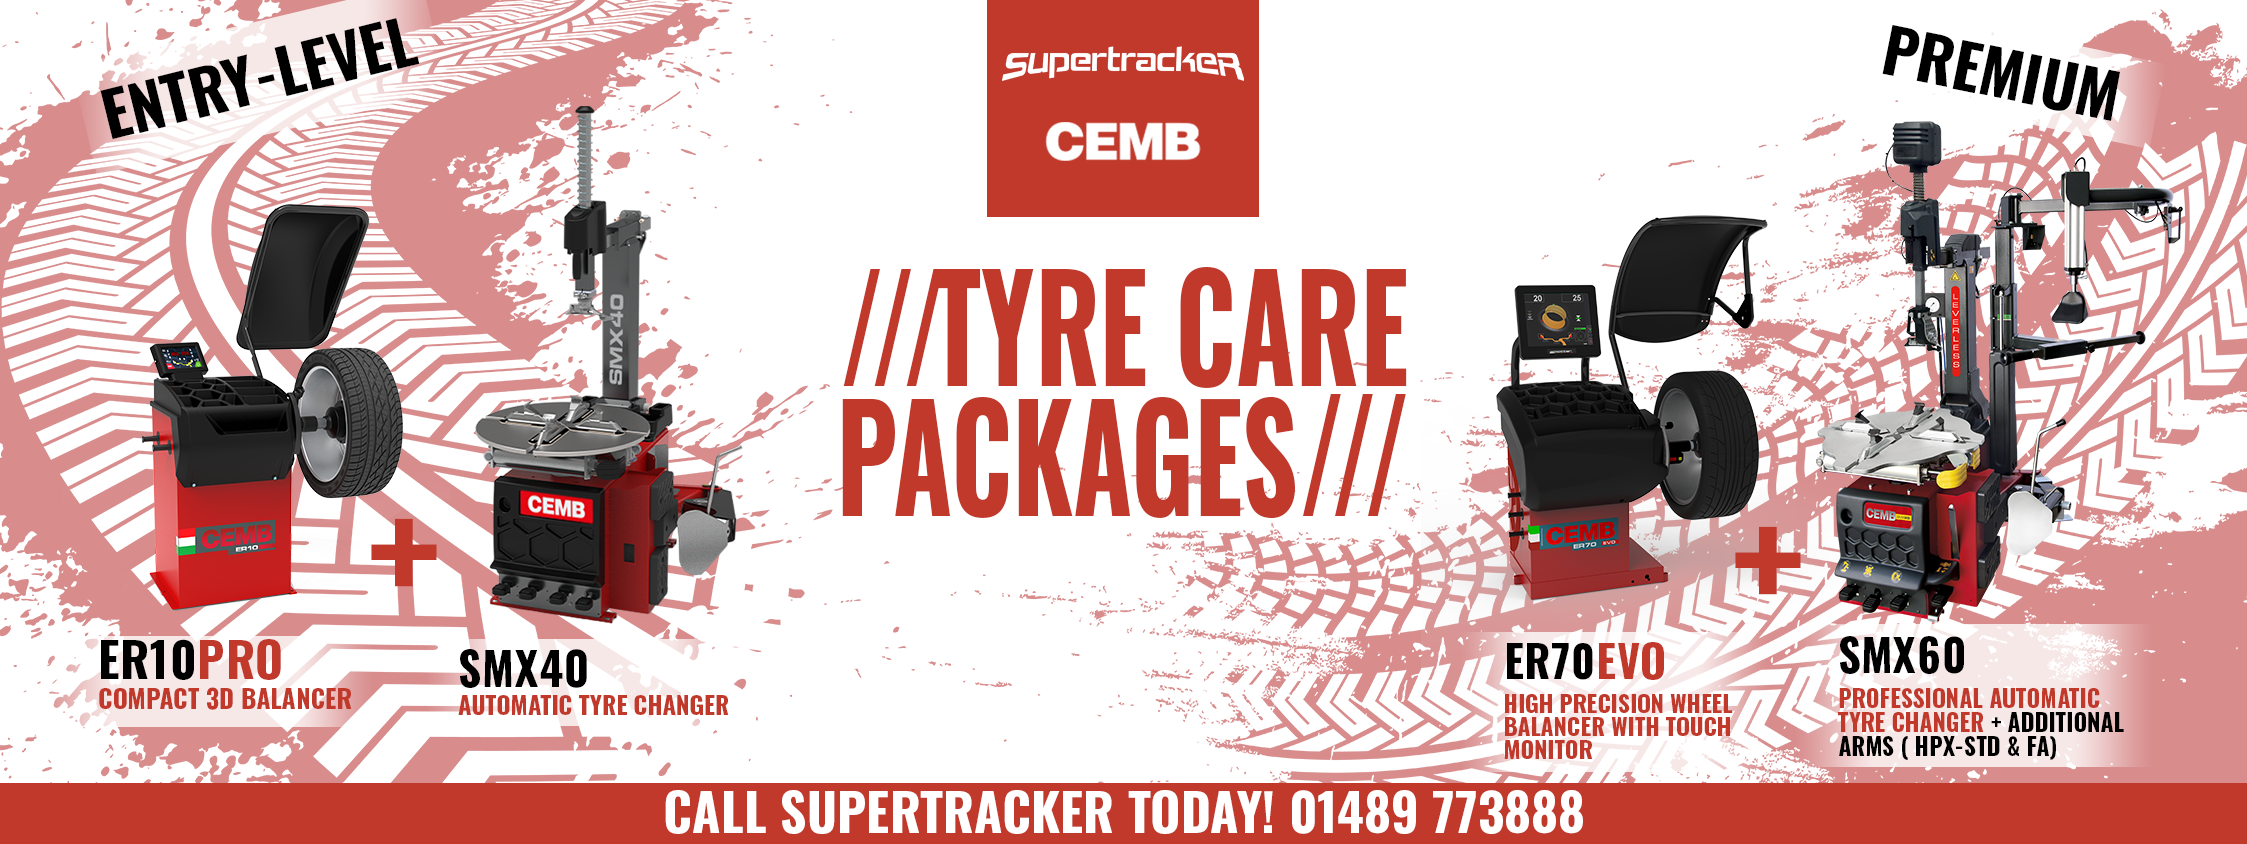 Tyre care packages